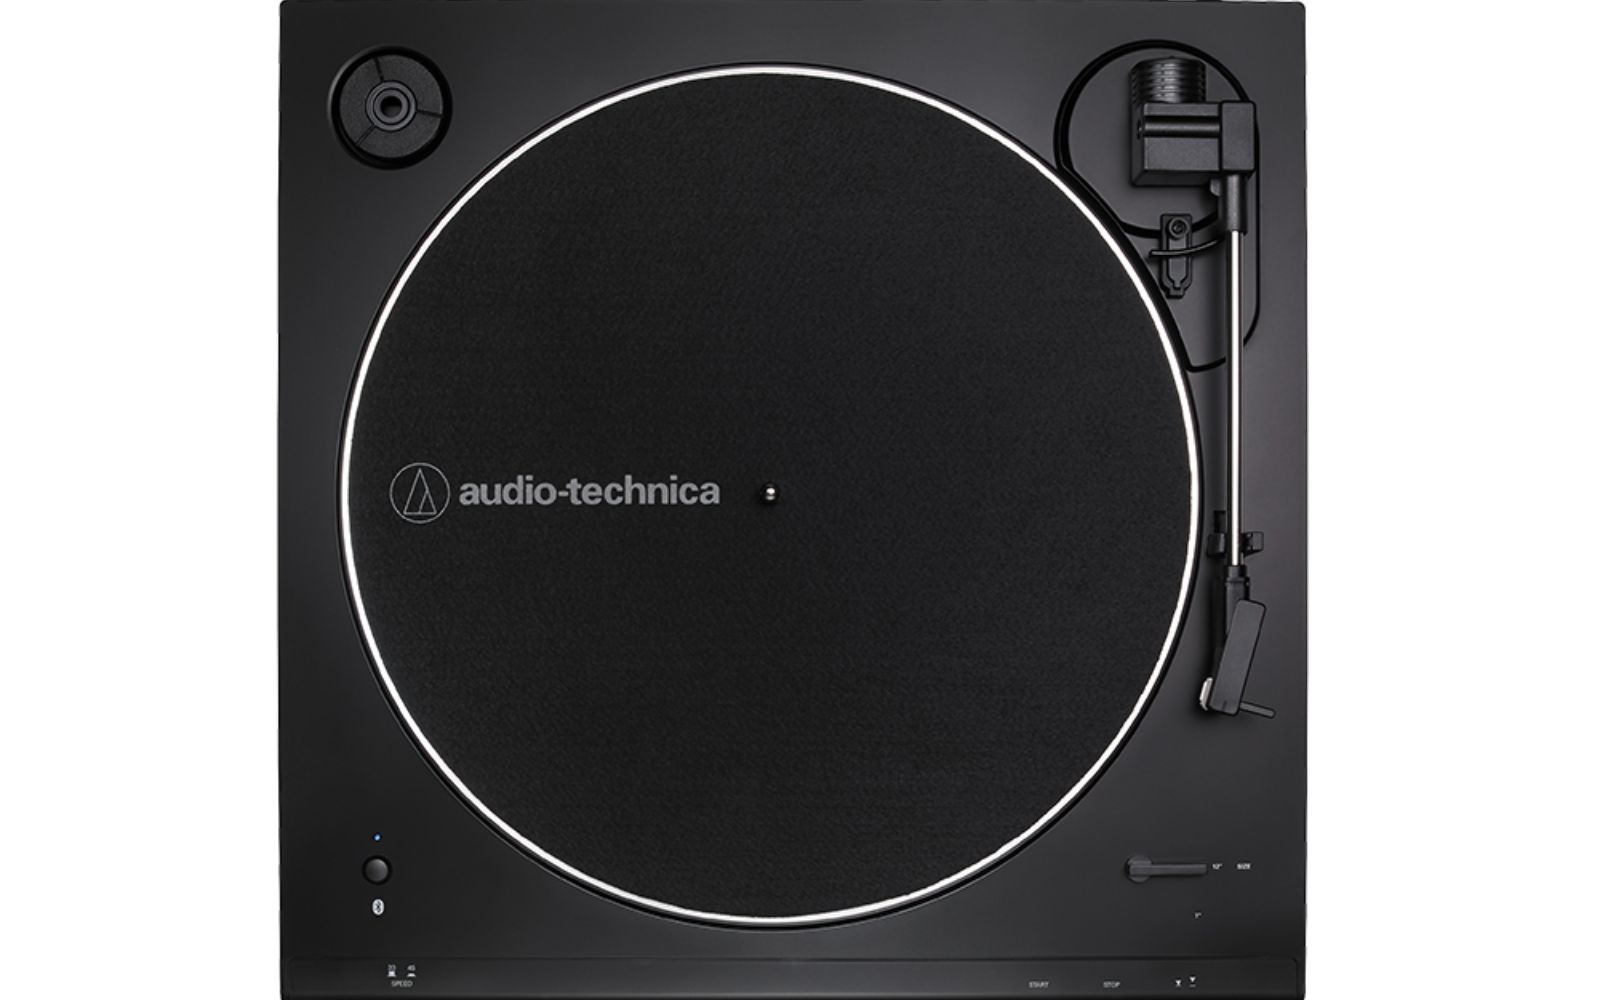 Audio-Technica has made 2022's best-looking turntable